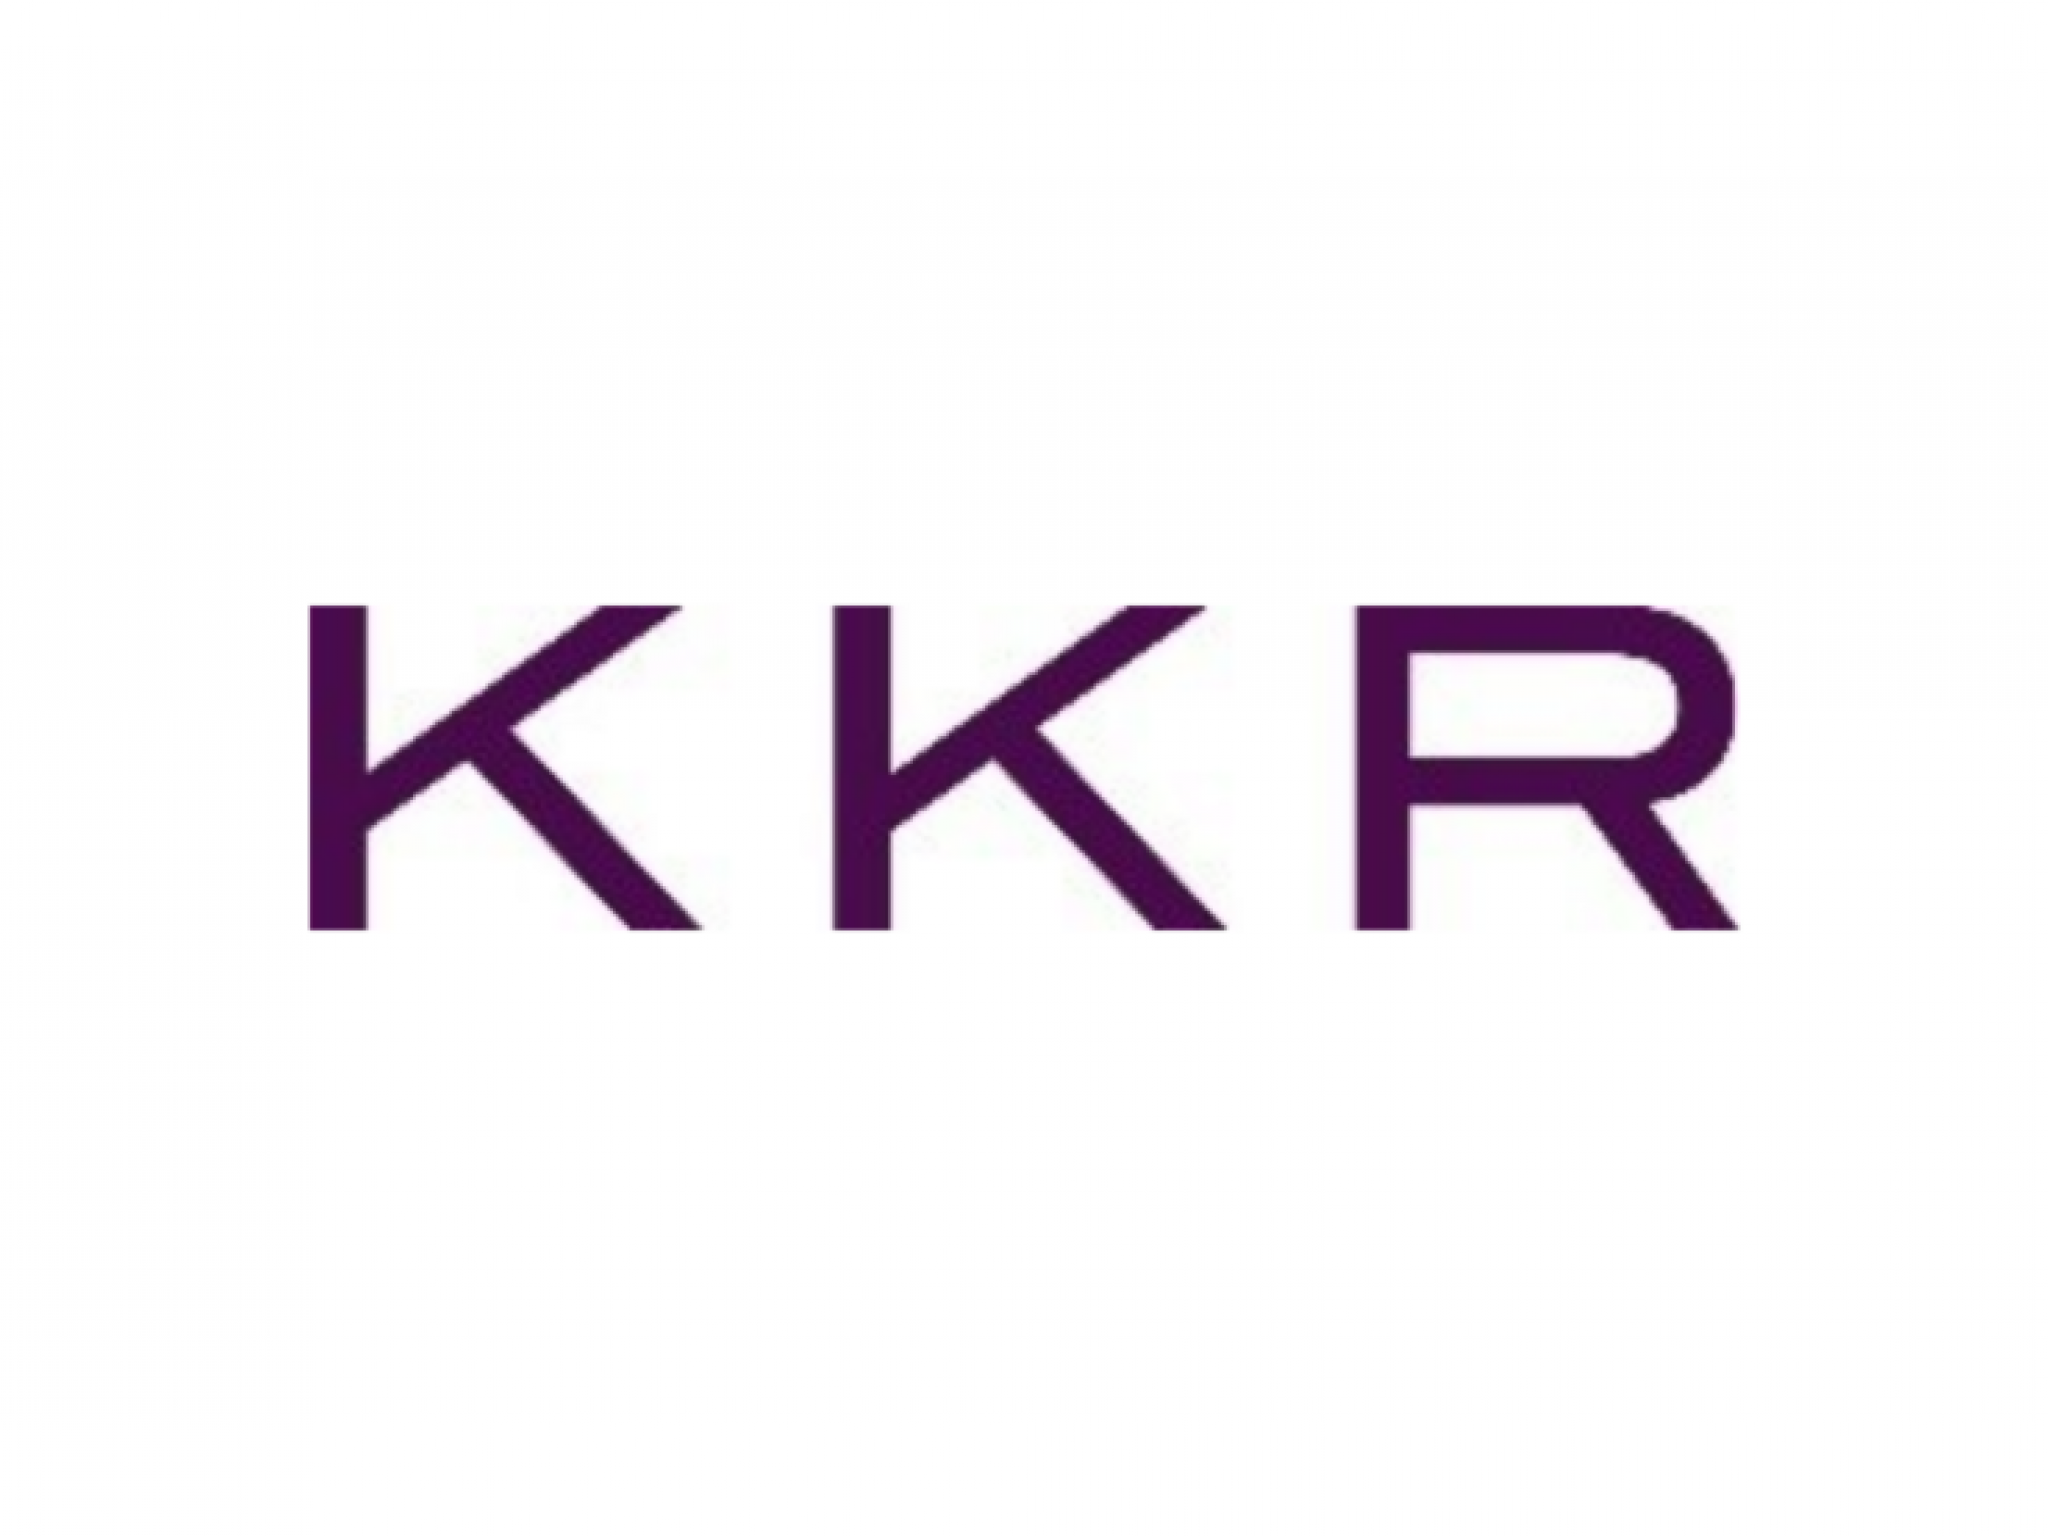  kkr-inks-14b-deal-for-australian-company-perpetuals-corporate-trust-and-wealth-management-units-details 